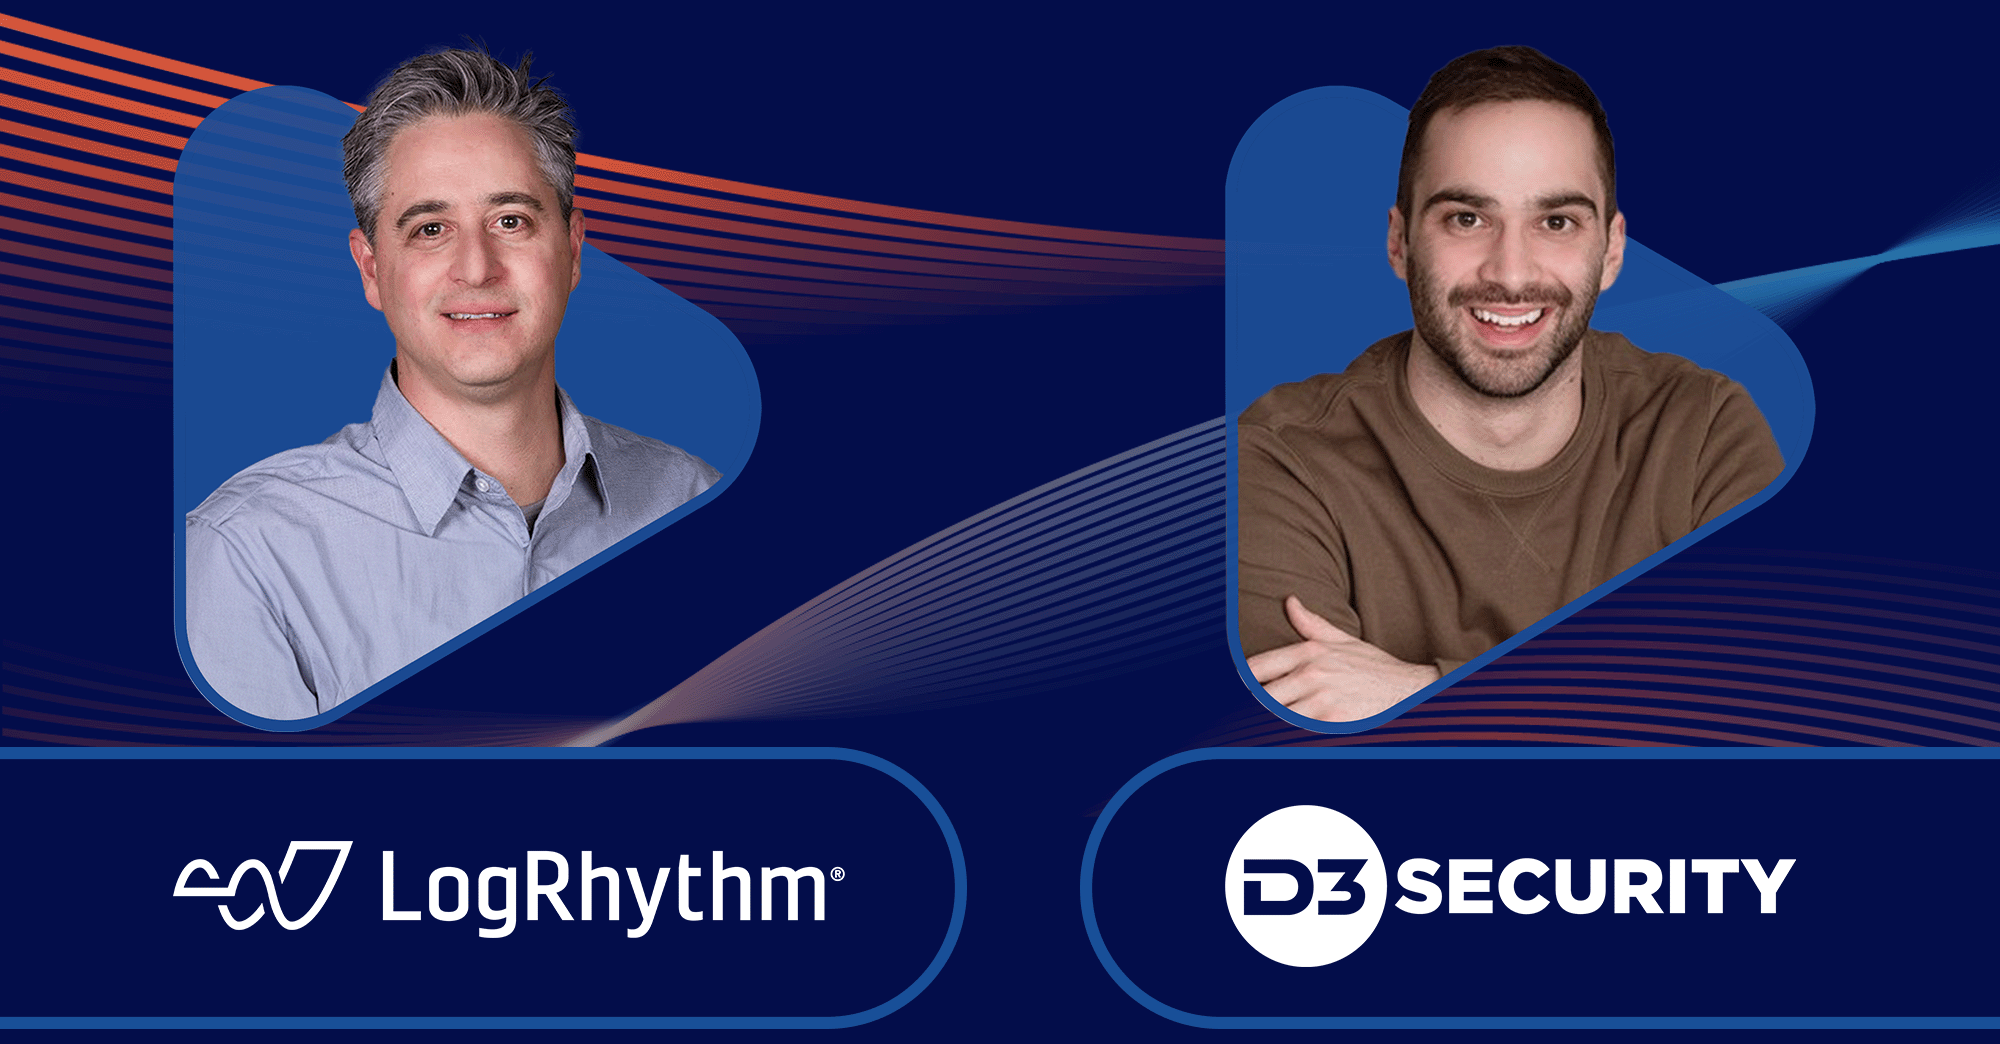 Intelligent threat detection and response with expert presenters from LogRhythm and D3 Security